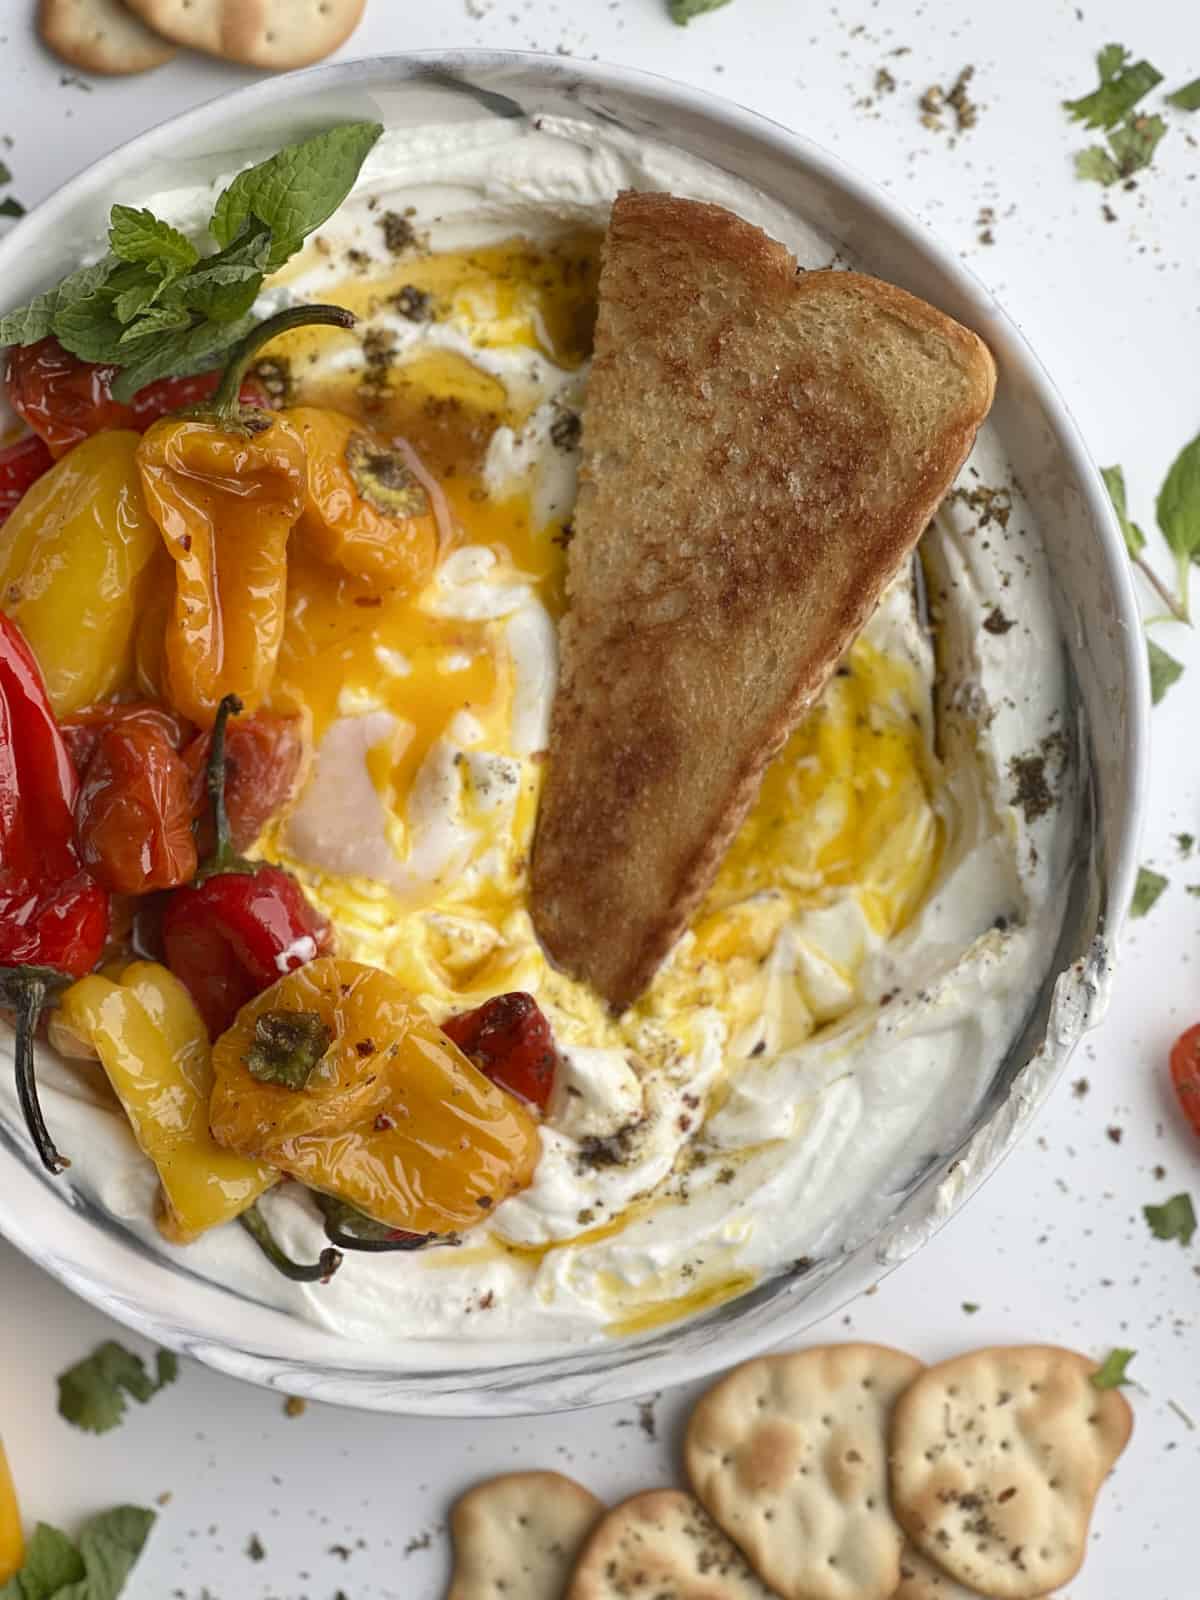 turkish eggs dish with yogurt, toast, and roasted peppers and tomatoes